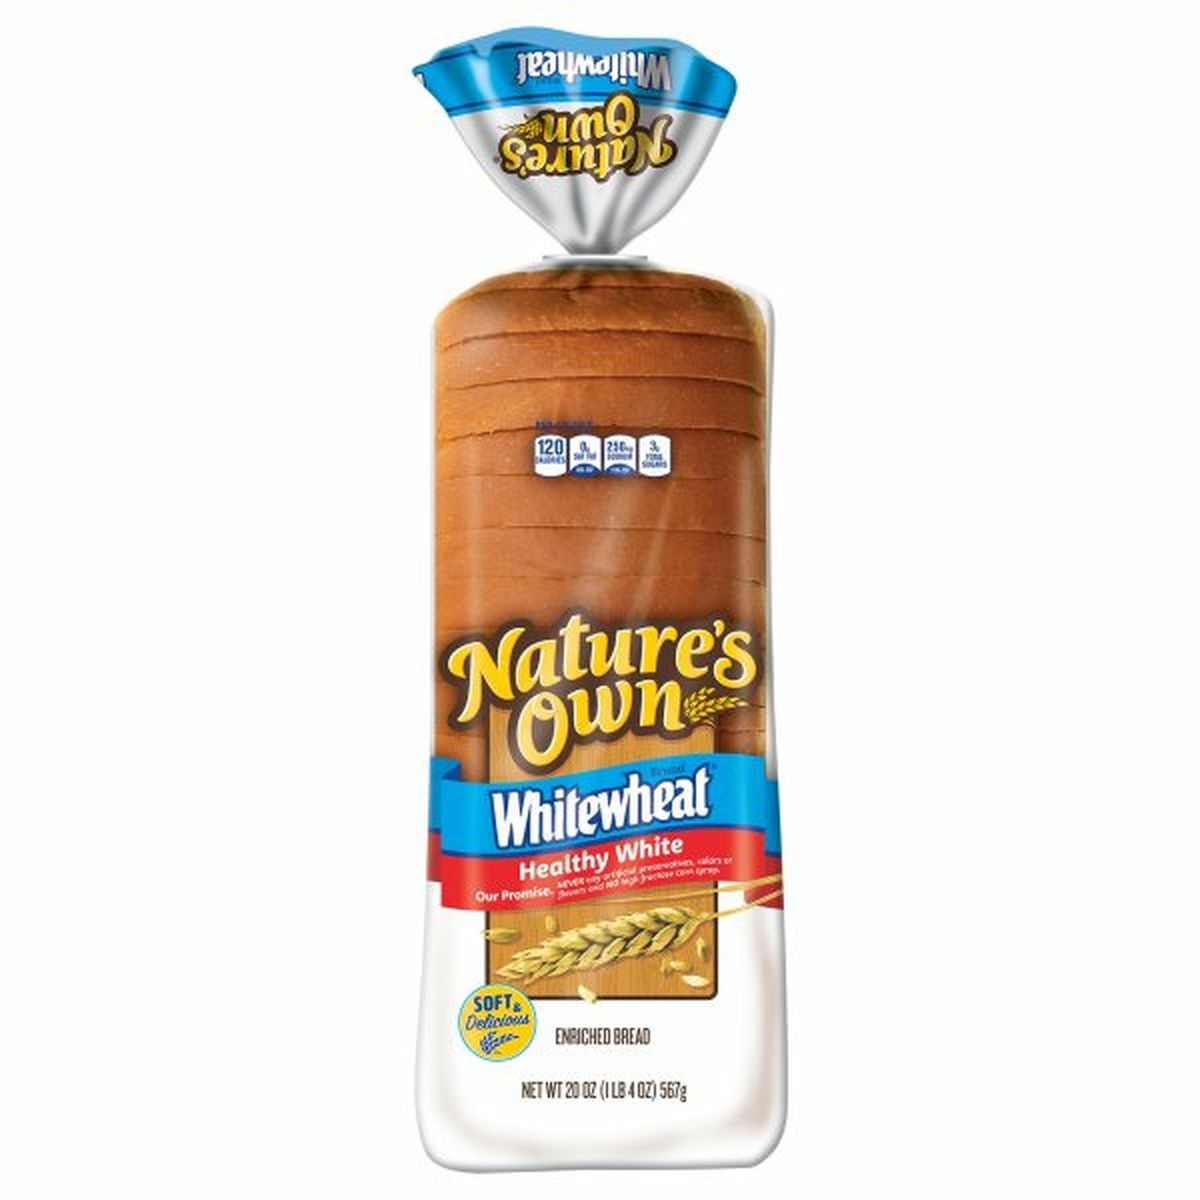 Calories in Nature's Own Whitewheat Bread, Healthy White